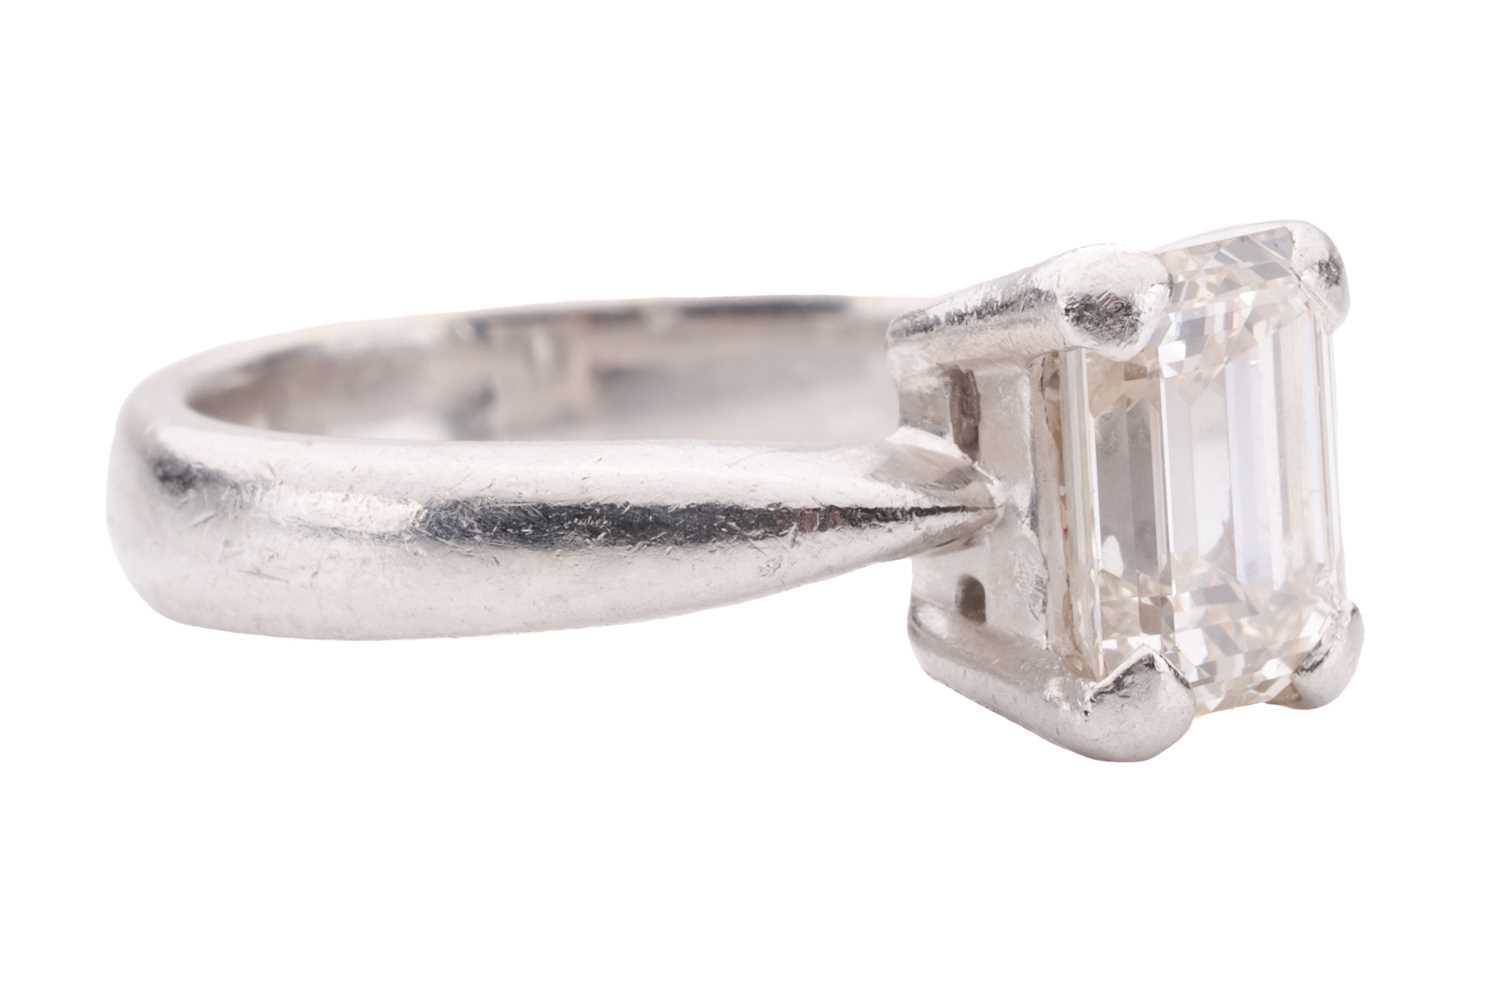 A diamond solitaire ring, set with an emerald-cut diamond with an estimated weight of 1.20ct, in a c - Image 2 of 4